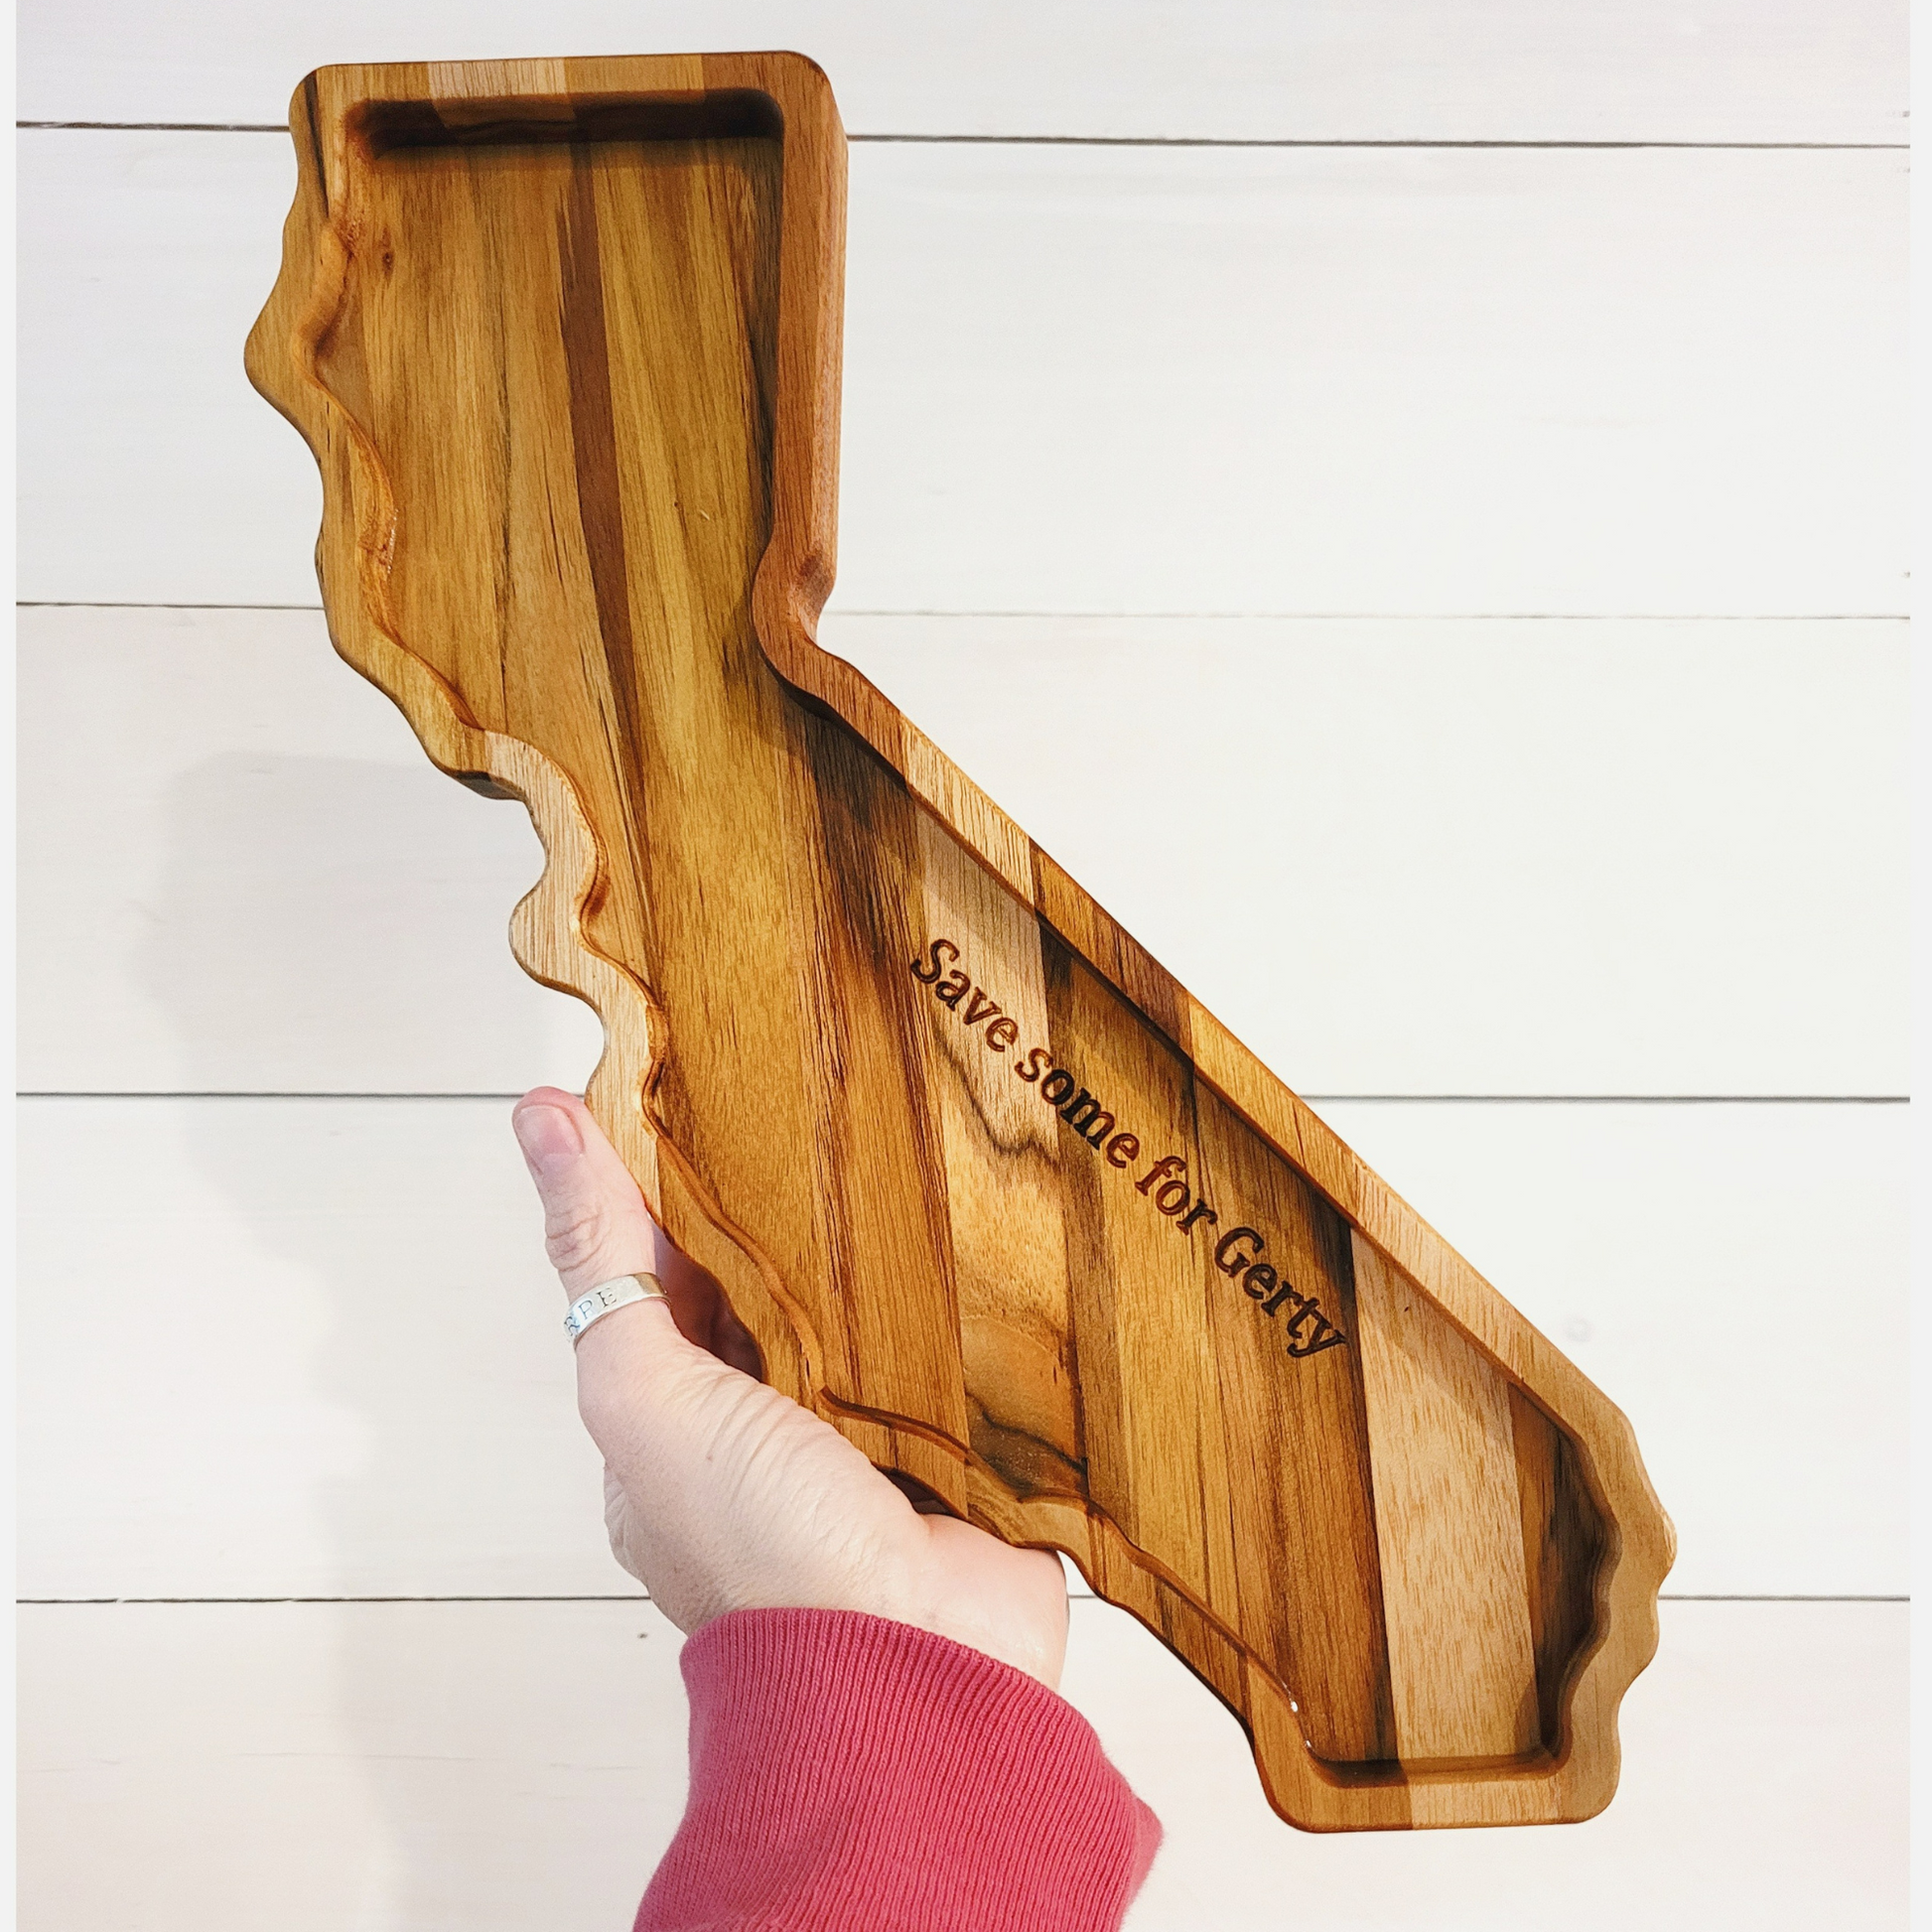 State-shaped wooden charcuterie board showcasing California, with a fun message engraved, a perfect centerpiece for entertaining